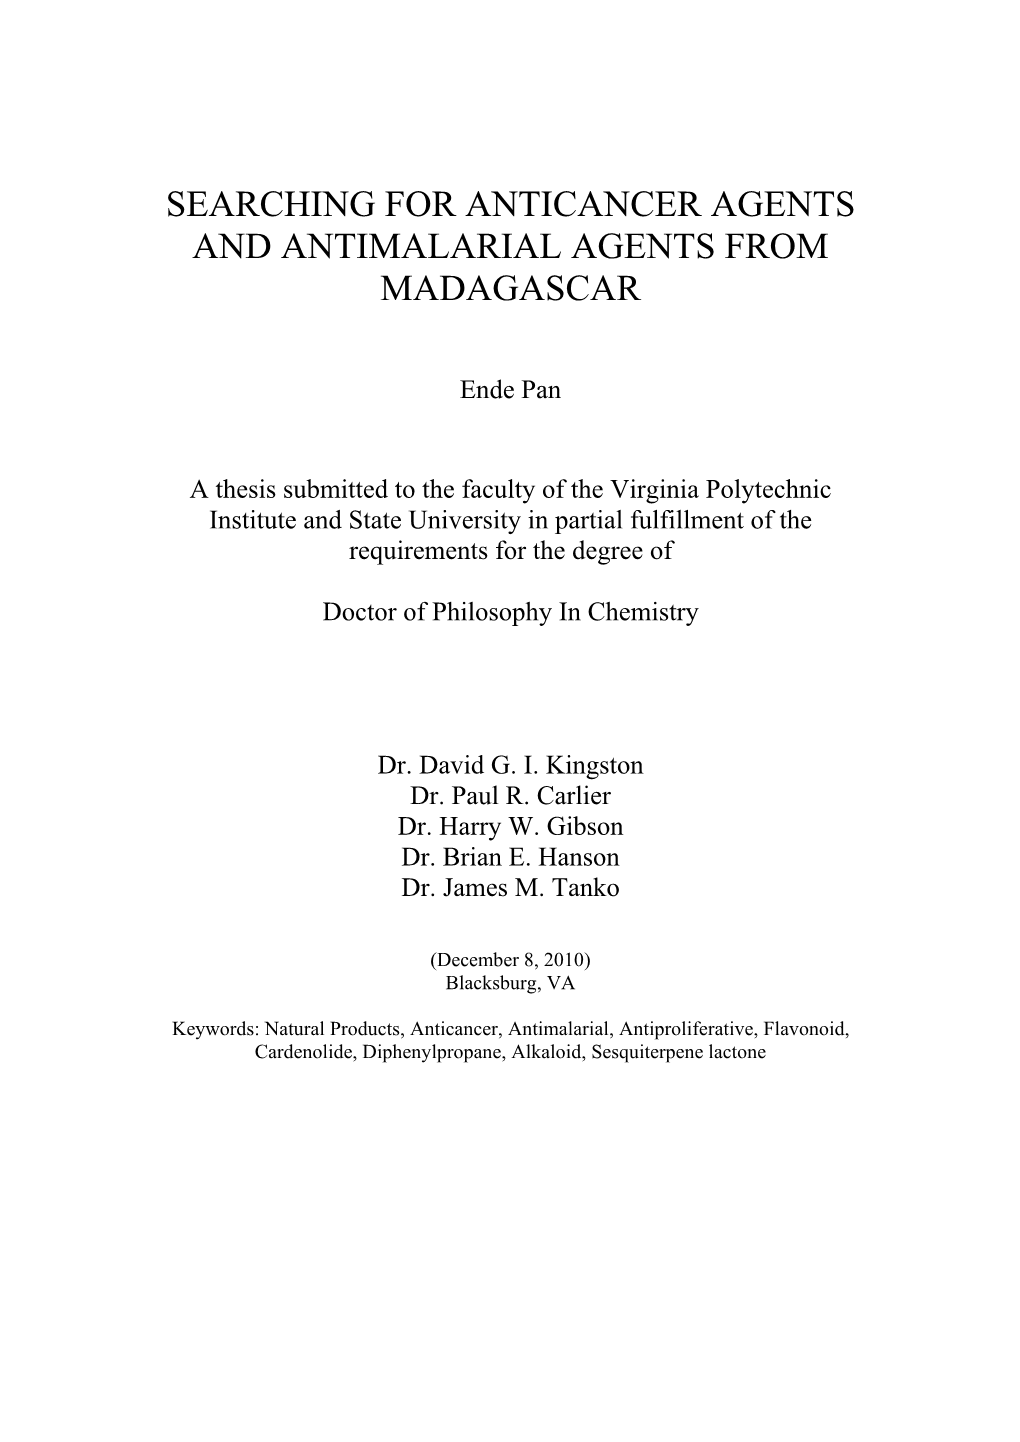 Searching for Anticancer Agents and Antimalarial Agents from Madagascar